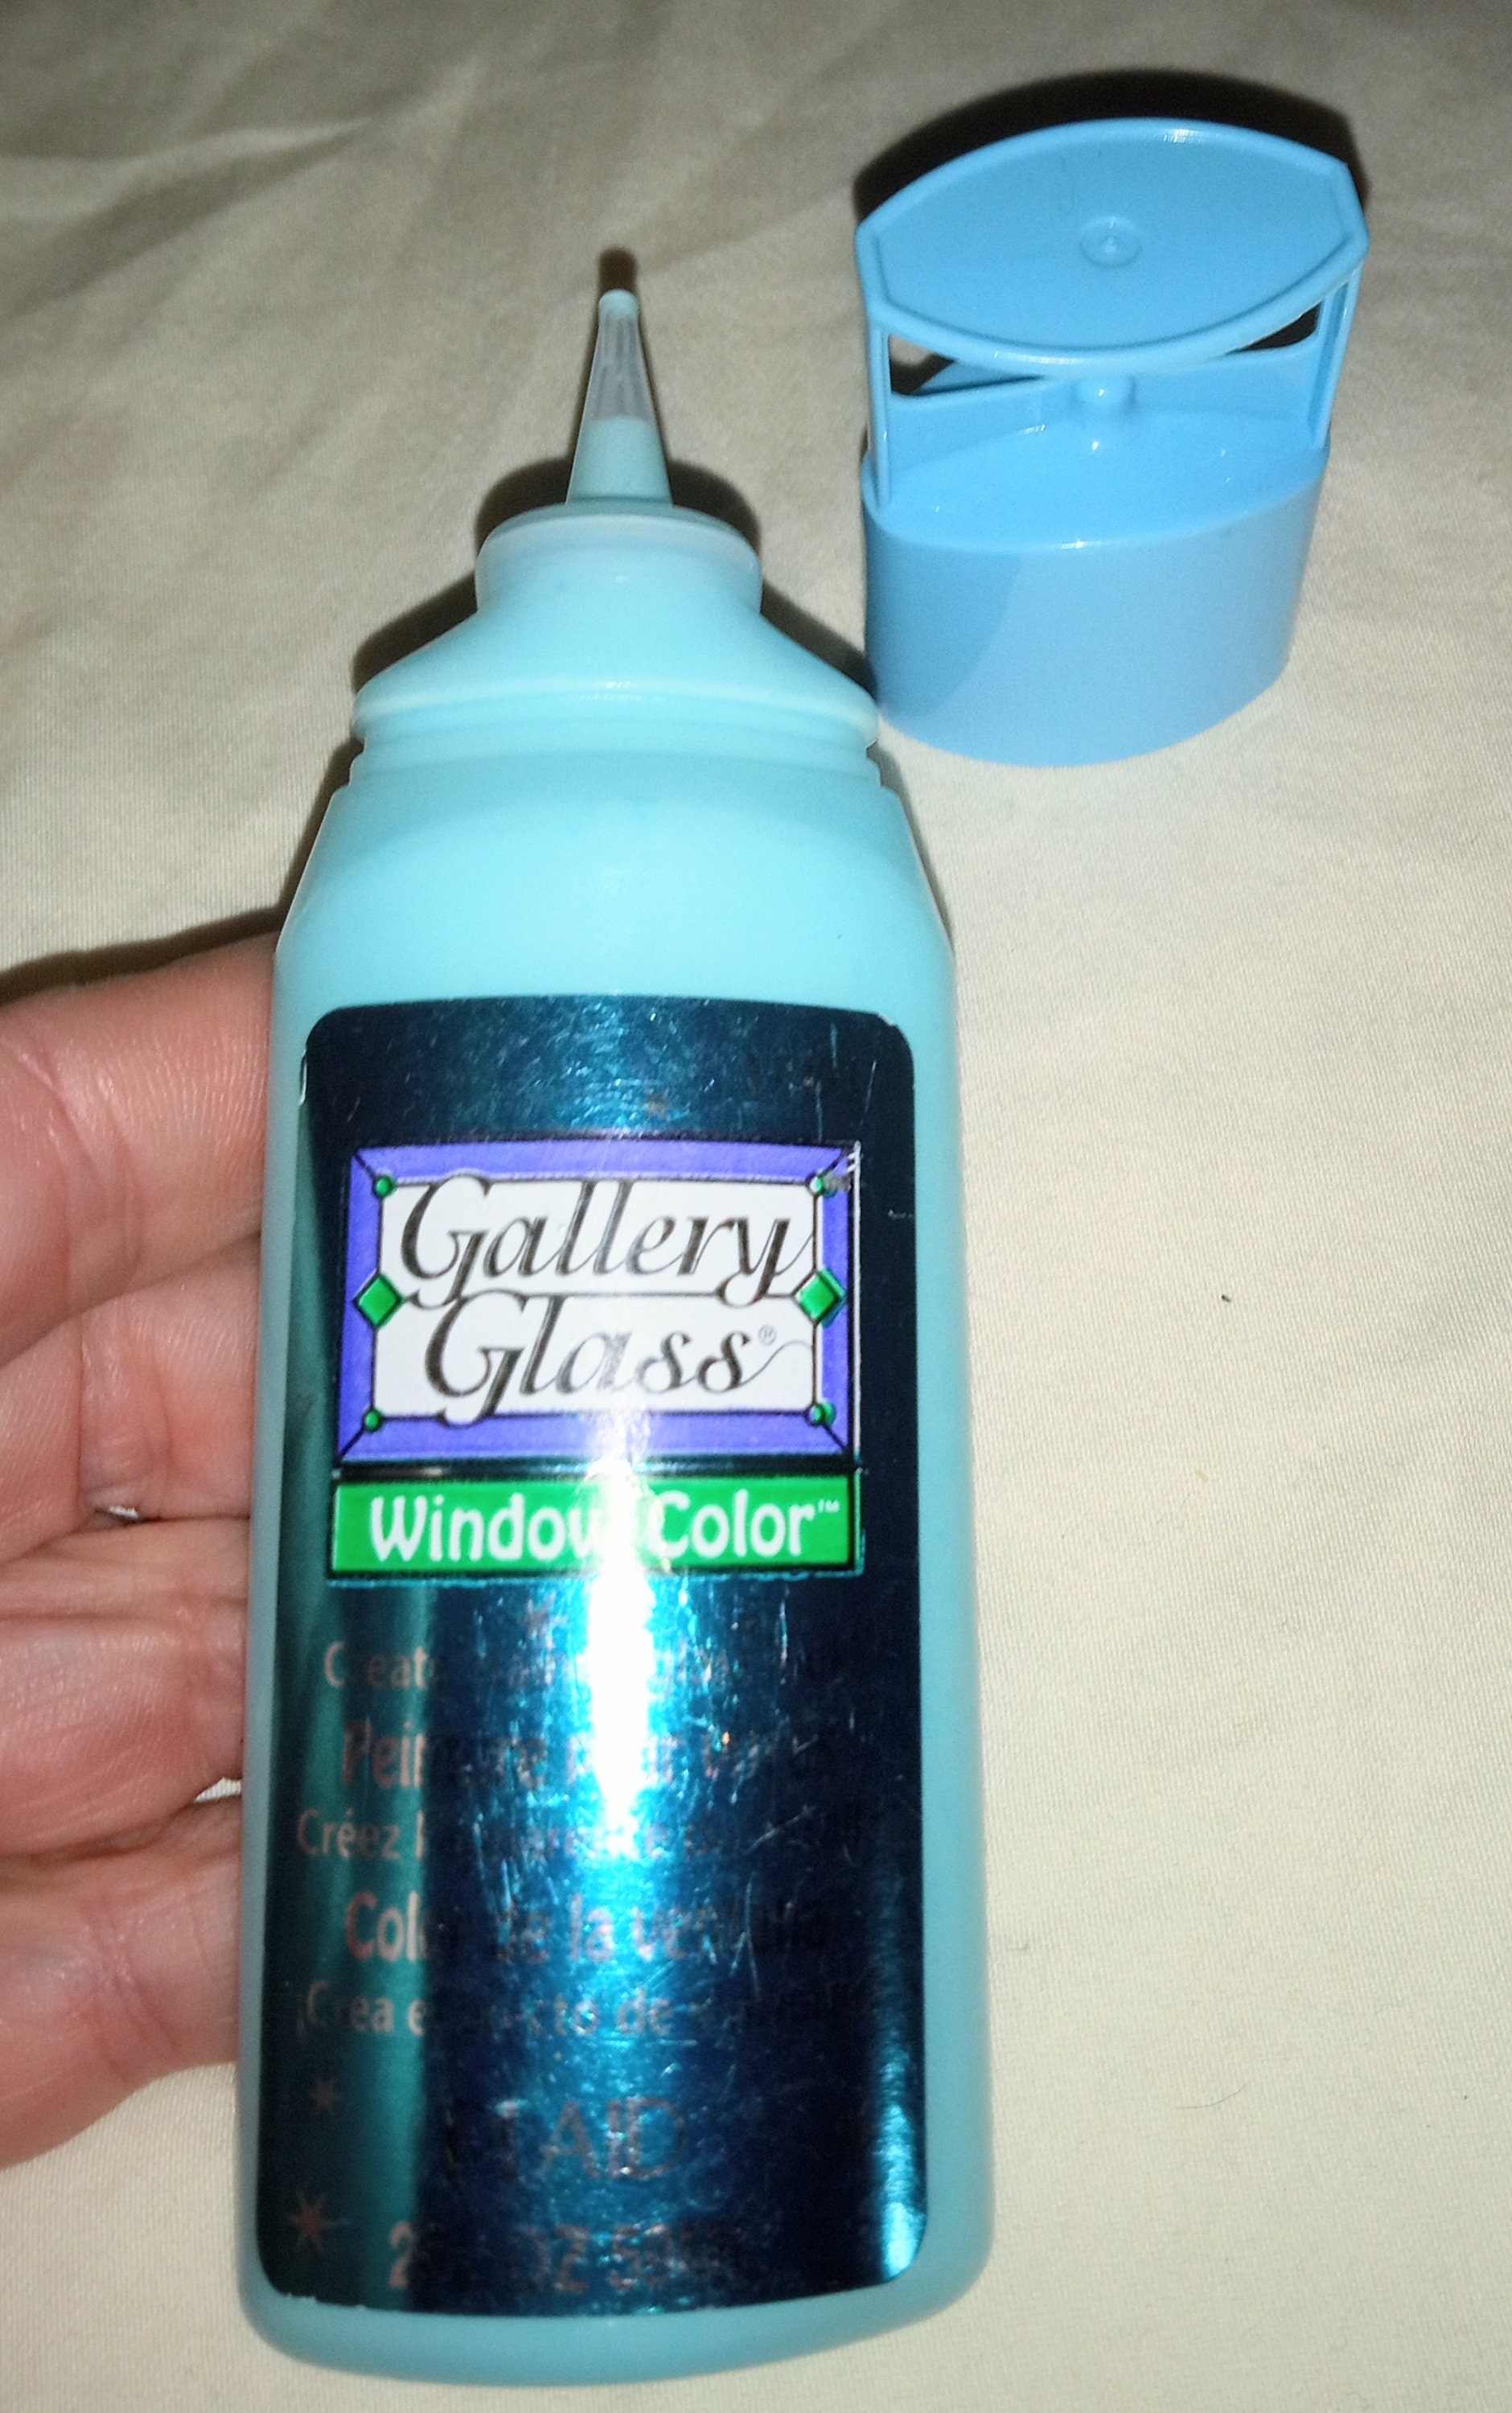 Plaid Gallery Glass Paint 2oz, Hologram Shimmer